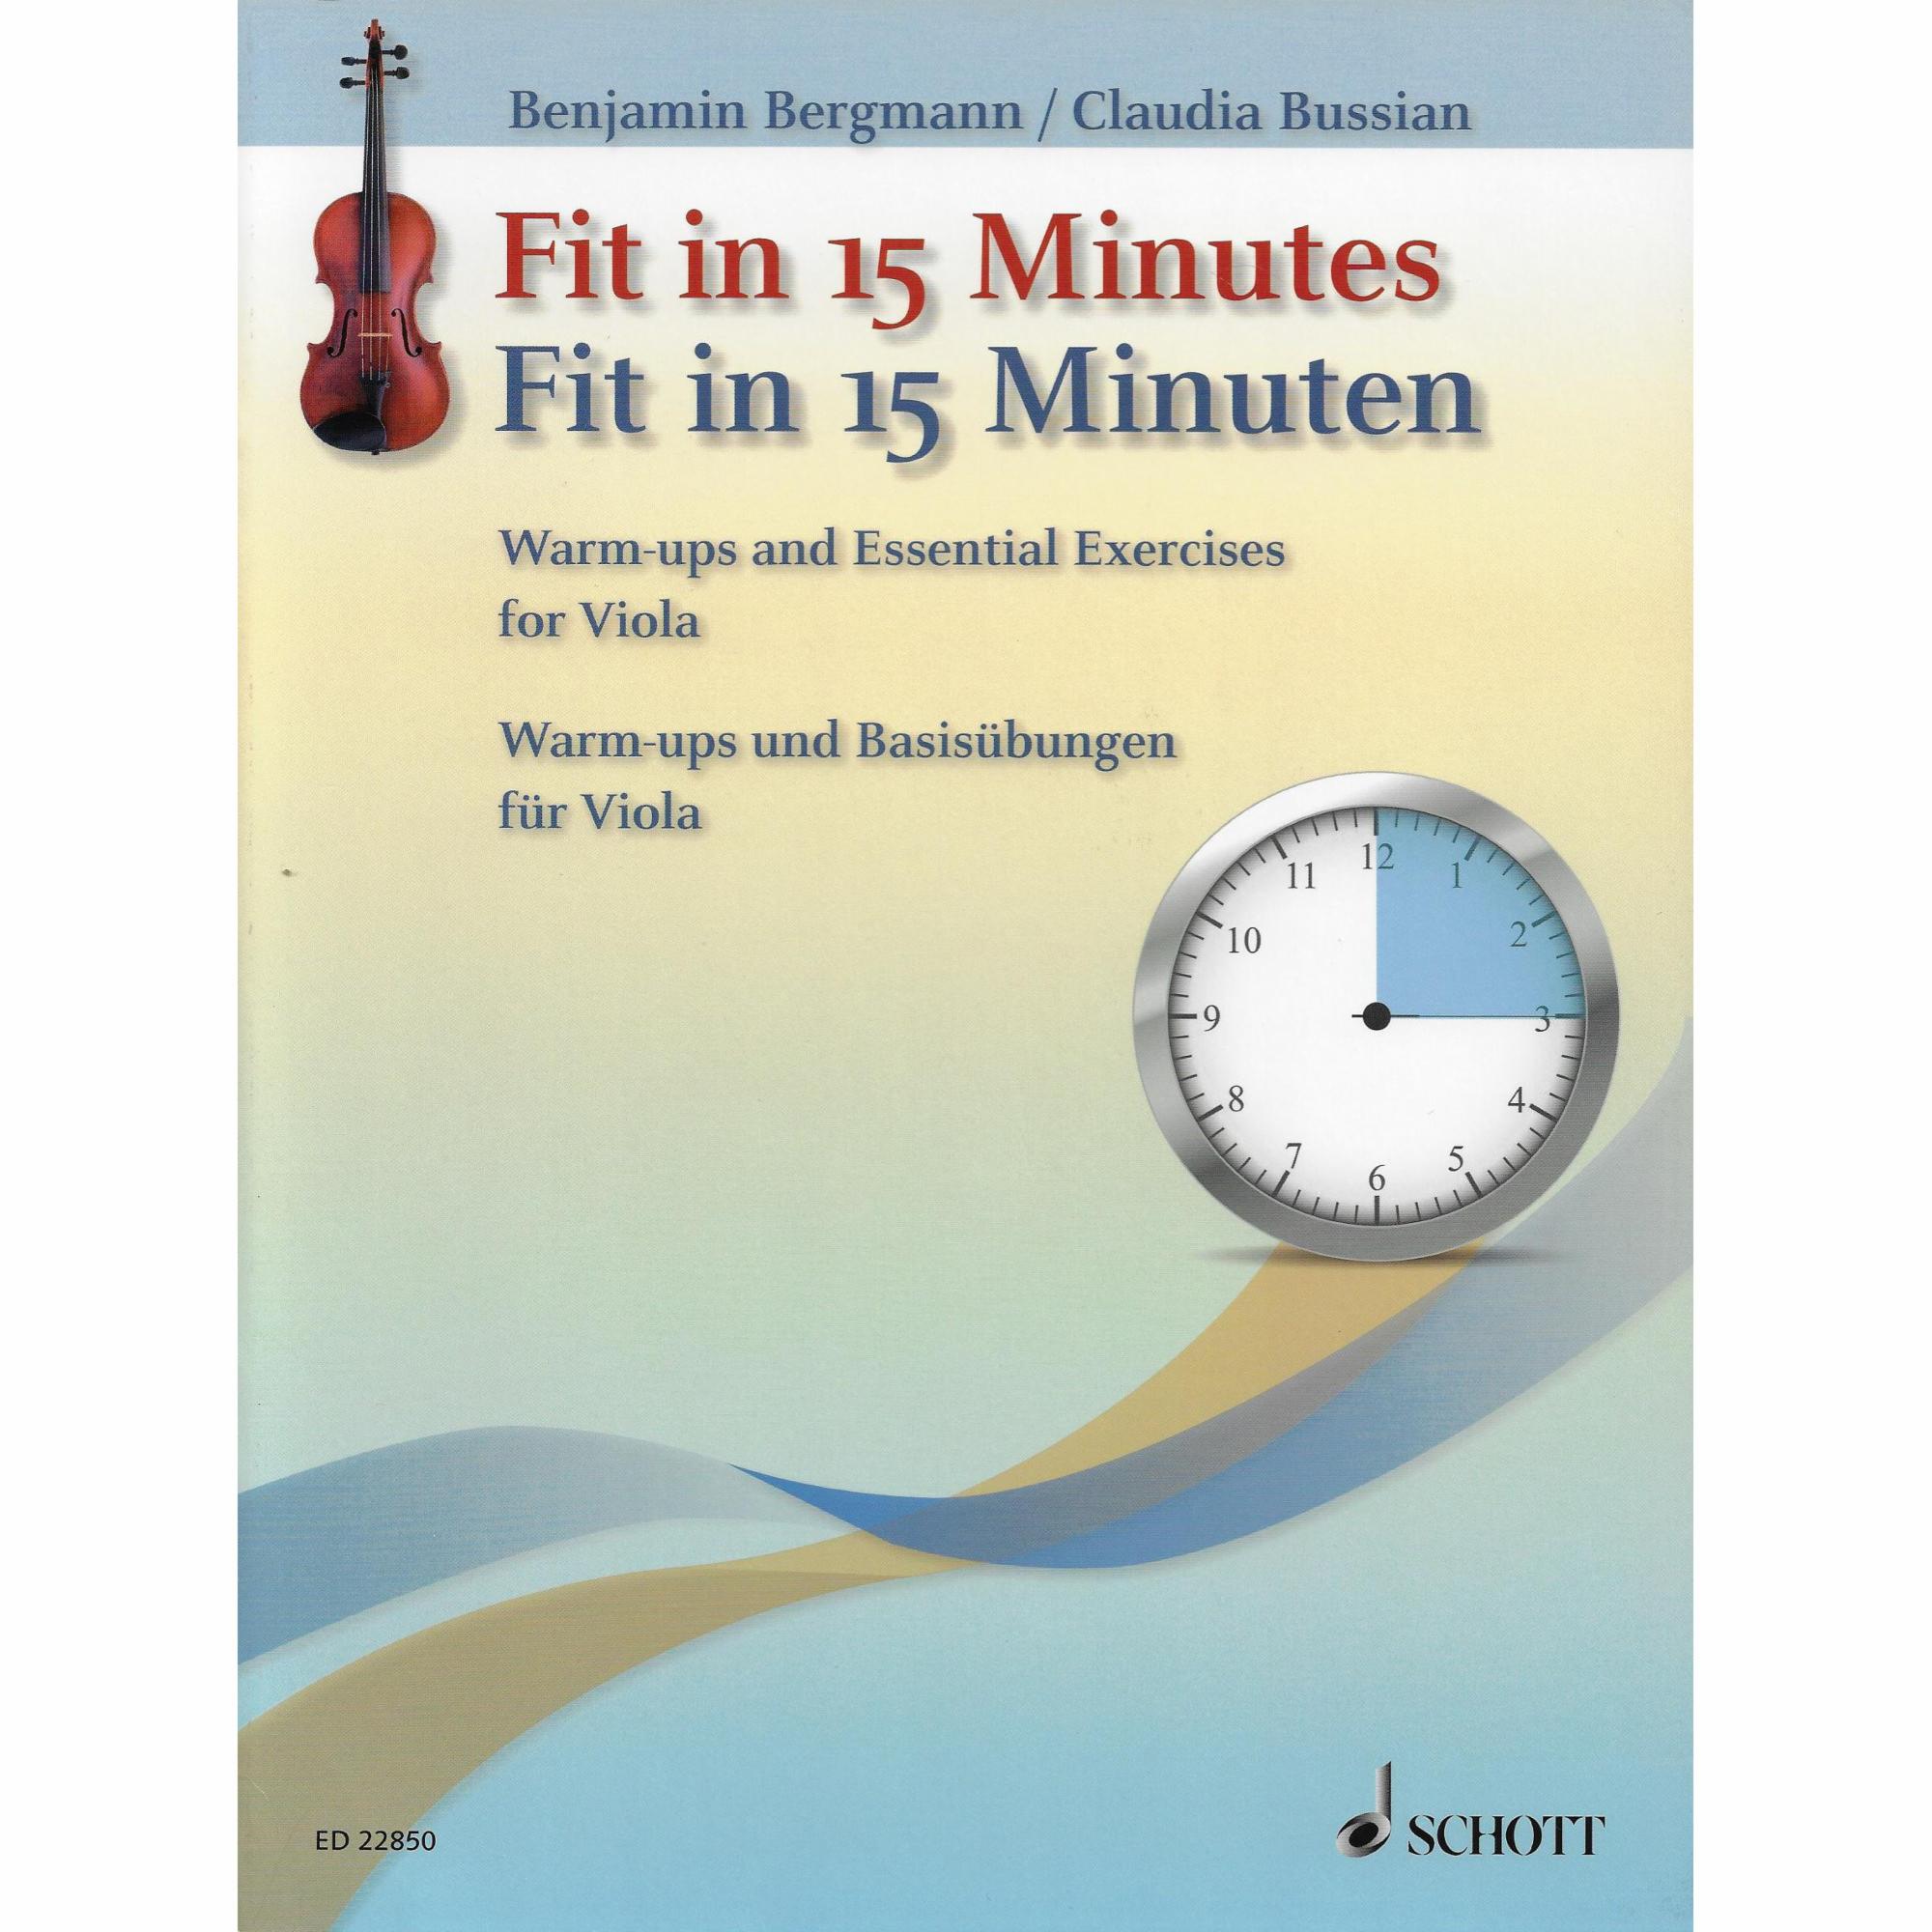 Bergmann & Bussian -- Fit in 15 Minutes for Viola